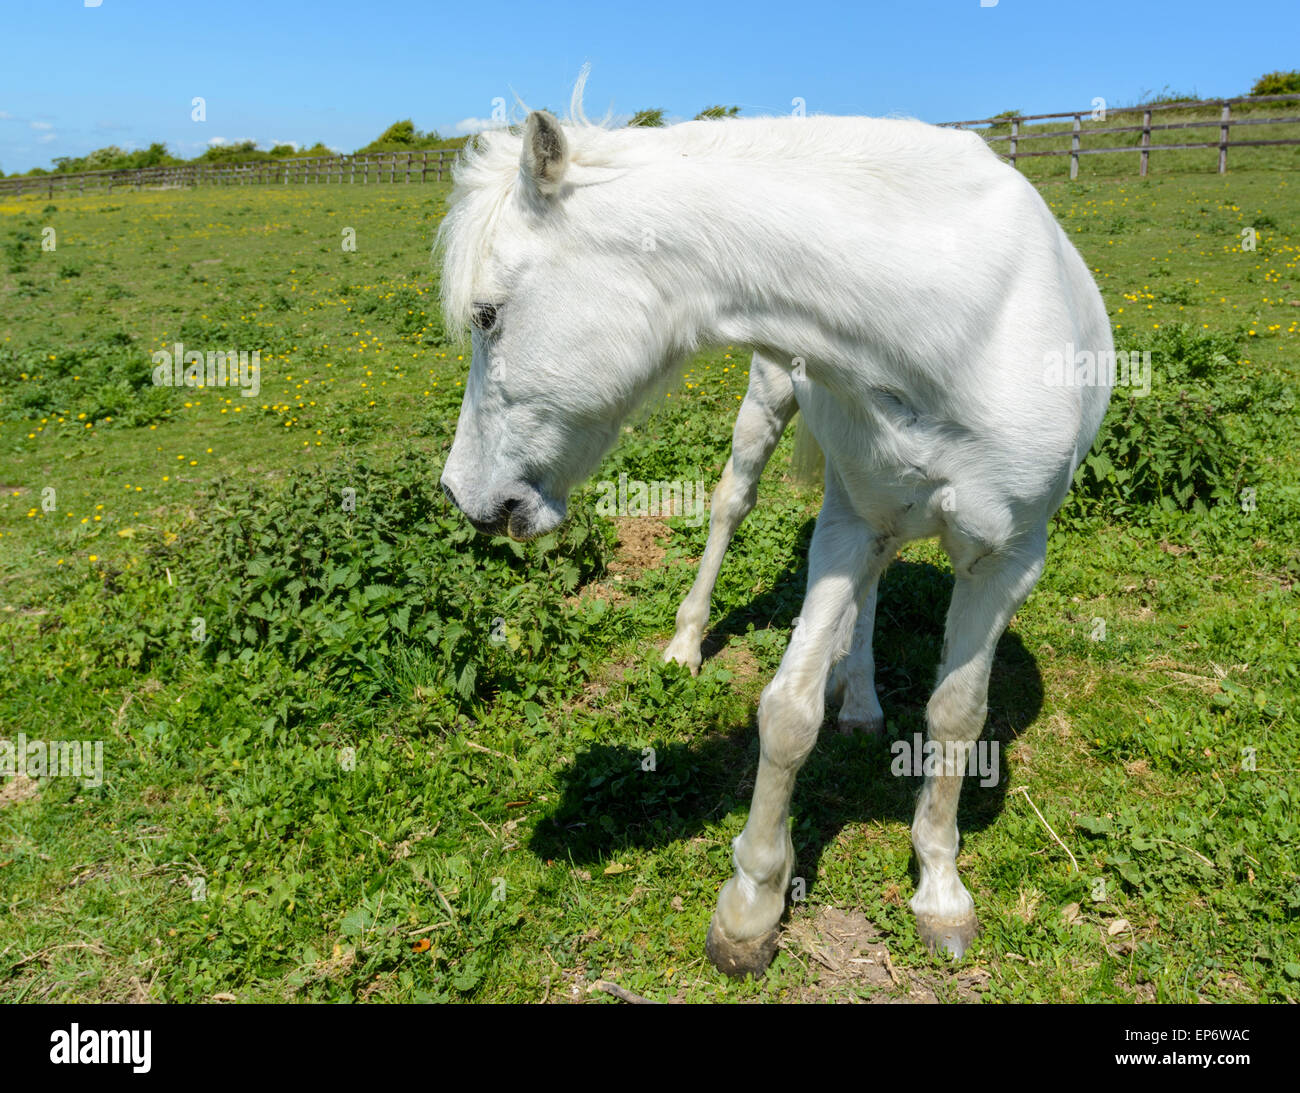 Domestic white horse standing in a field turning it's head to the side, in the UK. Stock Photo